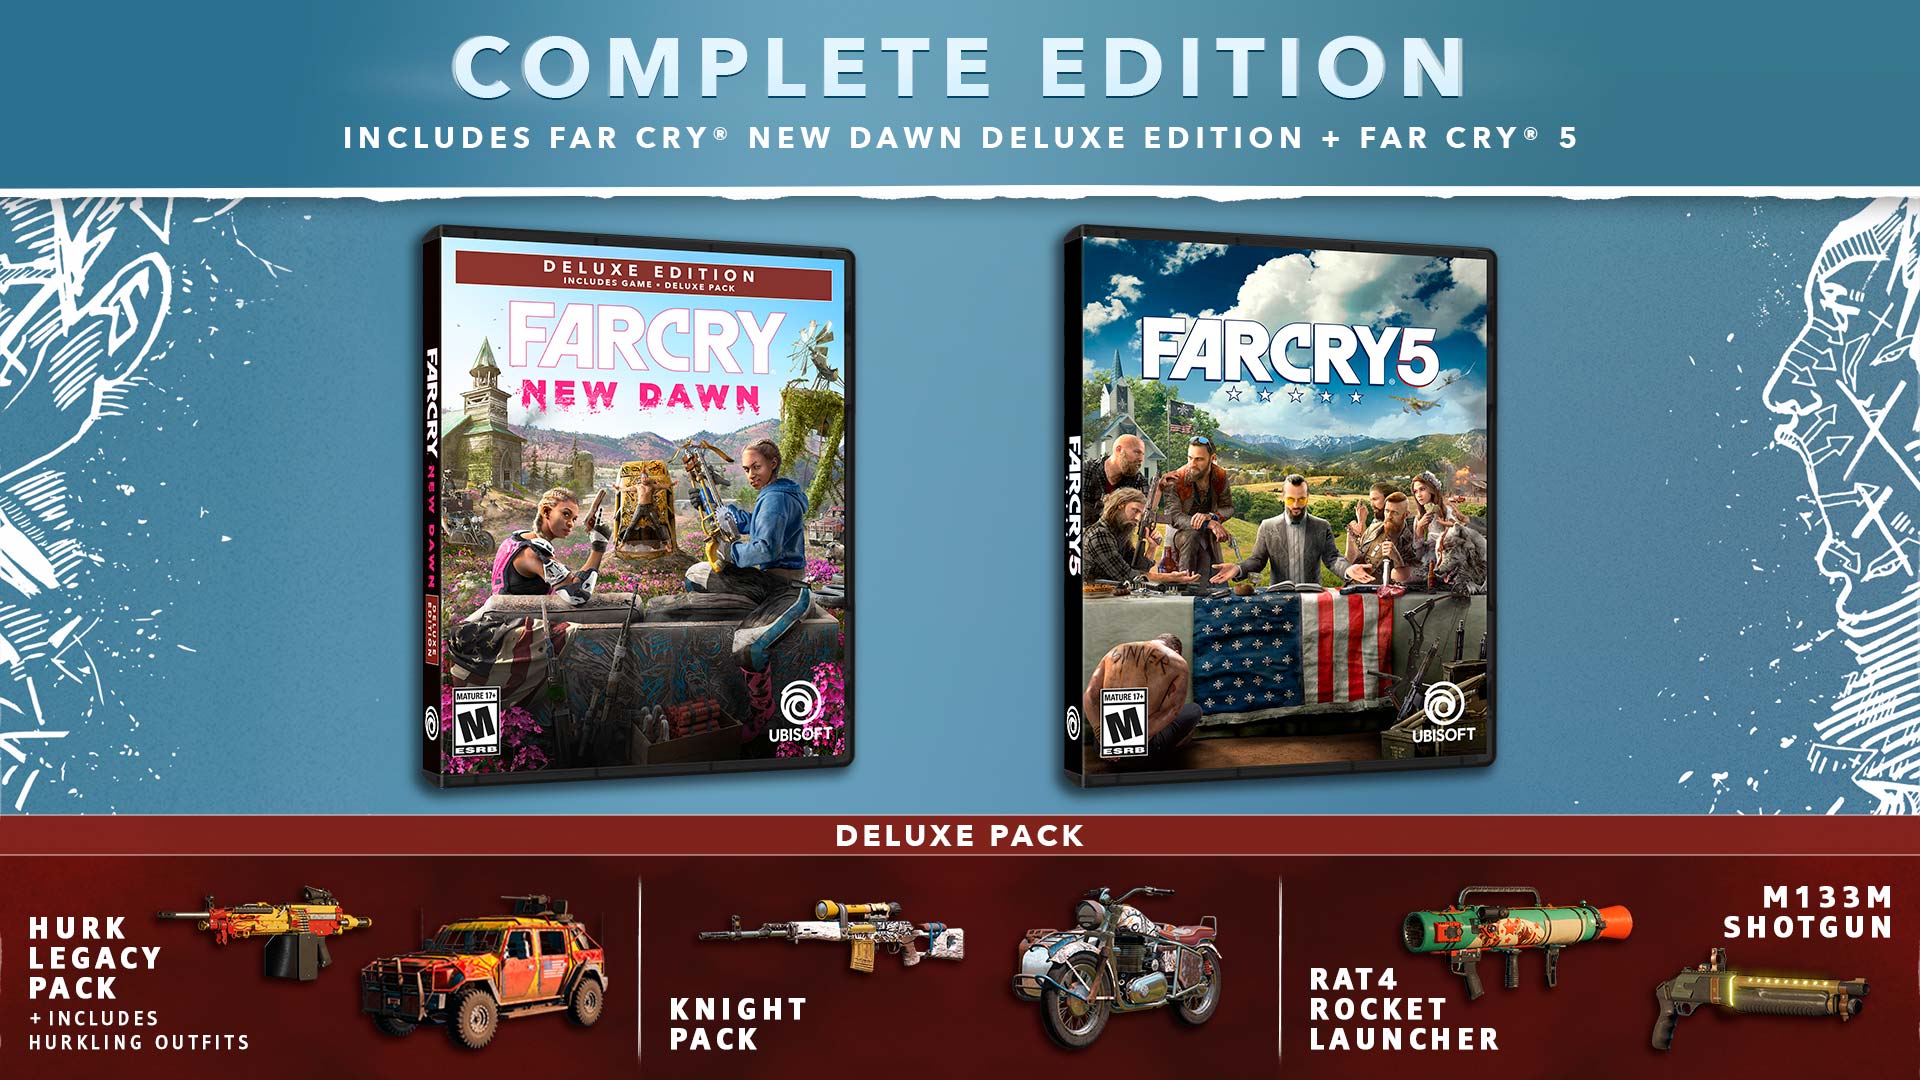 Far pack. Фар край 5 Делюкс эдишн. Far Cry 5 - Deluxe Pack. Far Cry New Dawn диск на ps4. Far Cry 4 полное издание (complete Edition) (ps4).